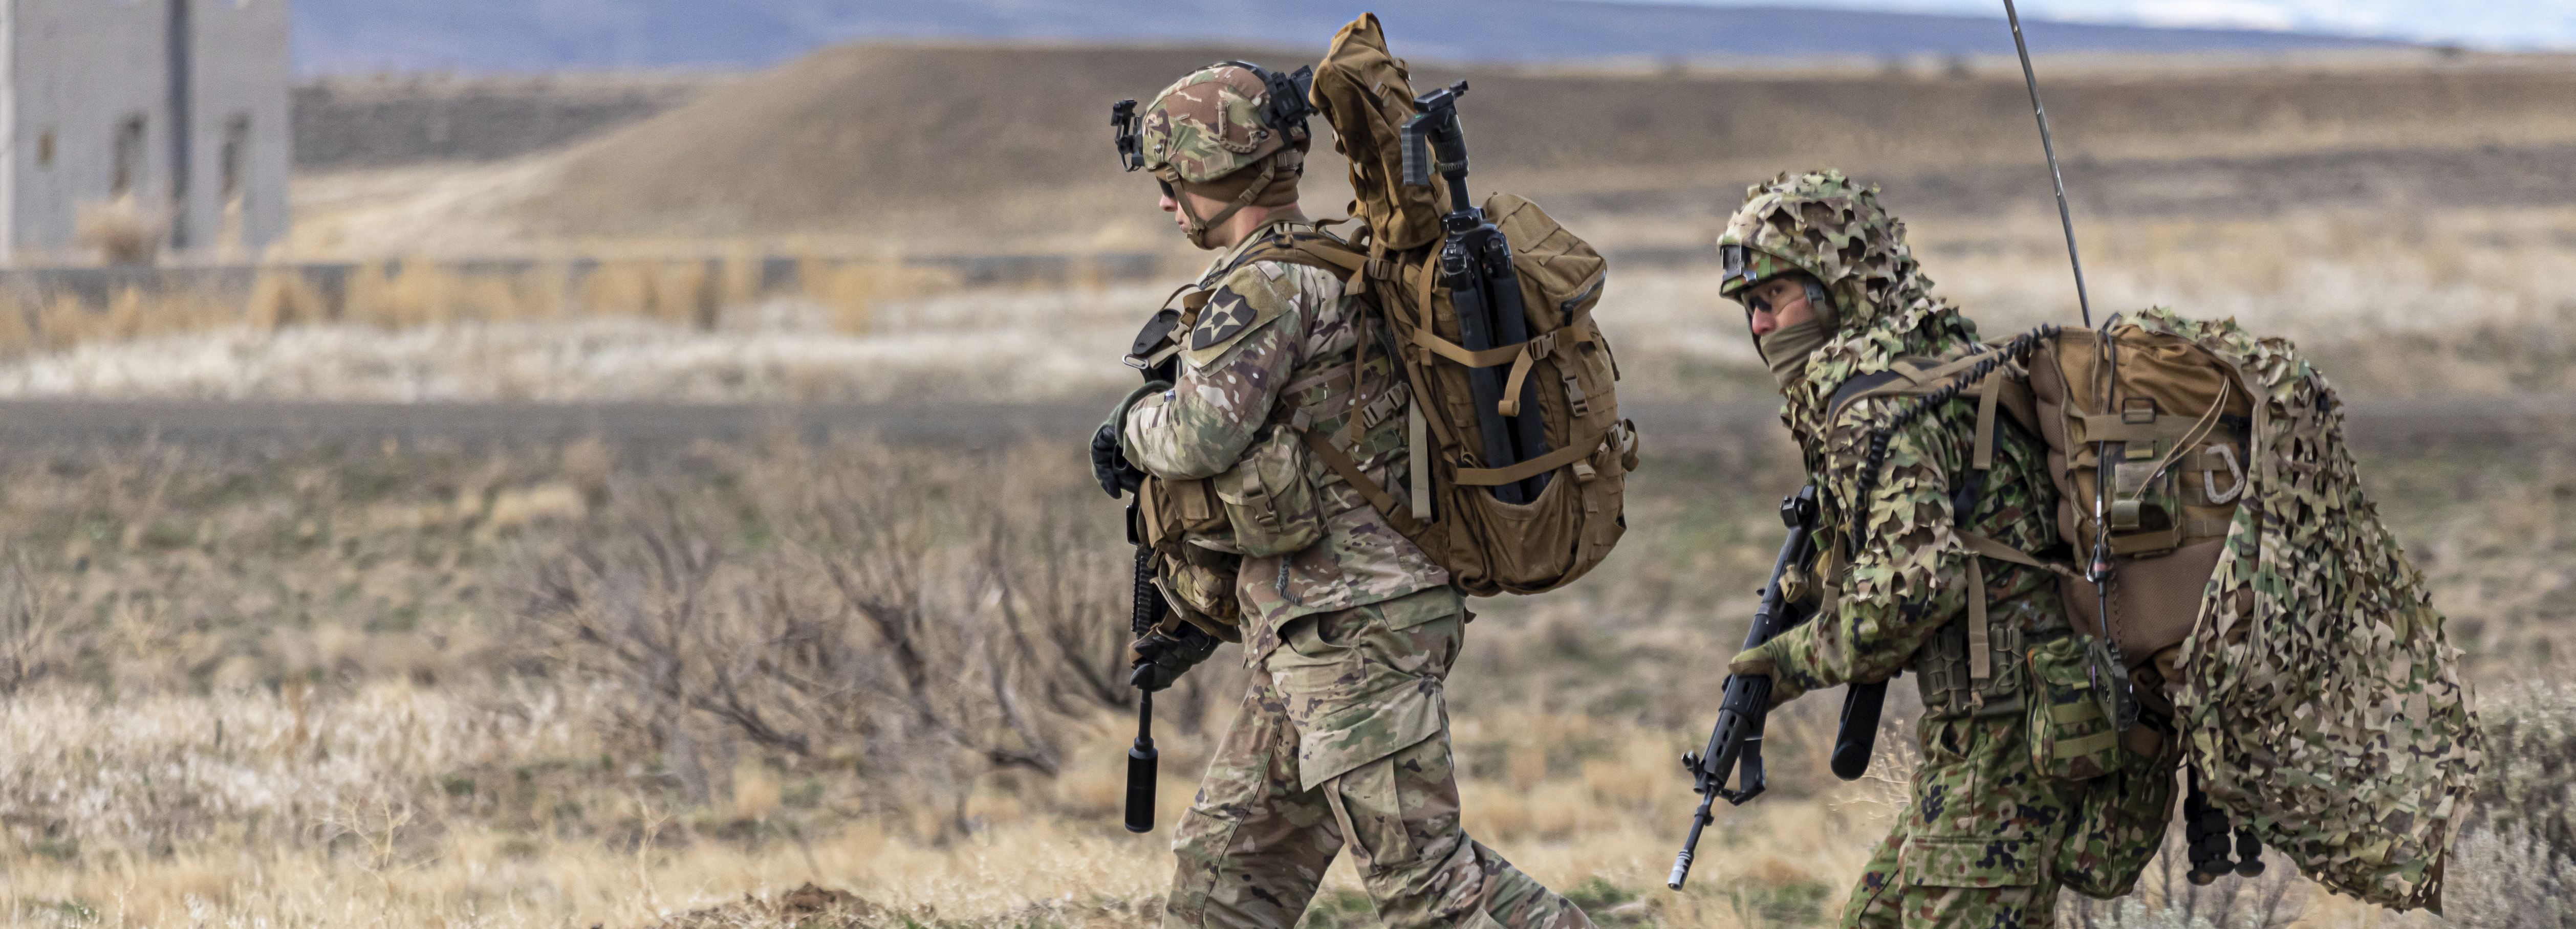 A soldier assigned to 2nd Stryker Brigade Combat Team, 7th Infantry Division alongside a member of the Japanese Ground Self-Defense Force run to a training objective during training exercise Rising Thunder on December 10, 2021 at Yakima Training Center, Wa.